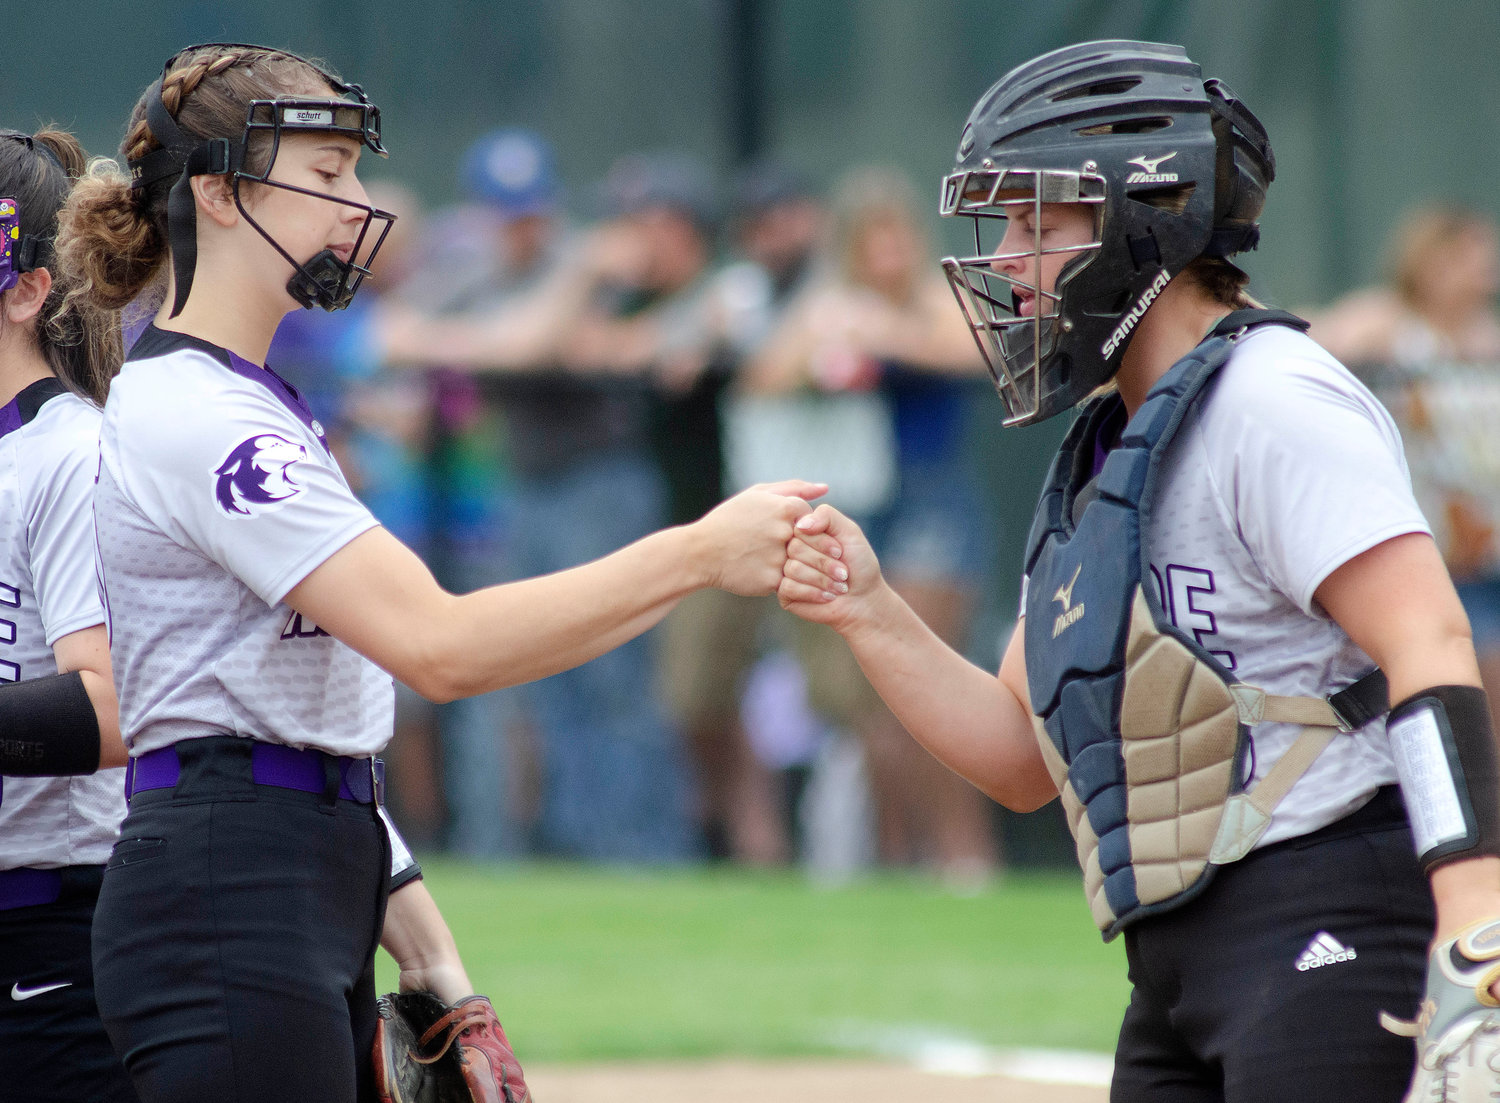 Battery mates Reily Amaral (left) and Grace Stephenson bump fists as is their custom before every inning.